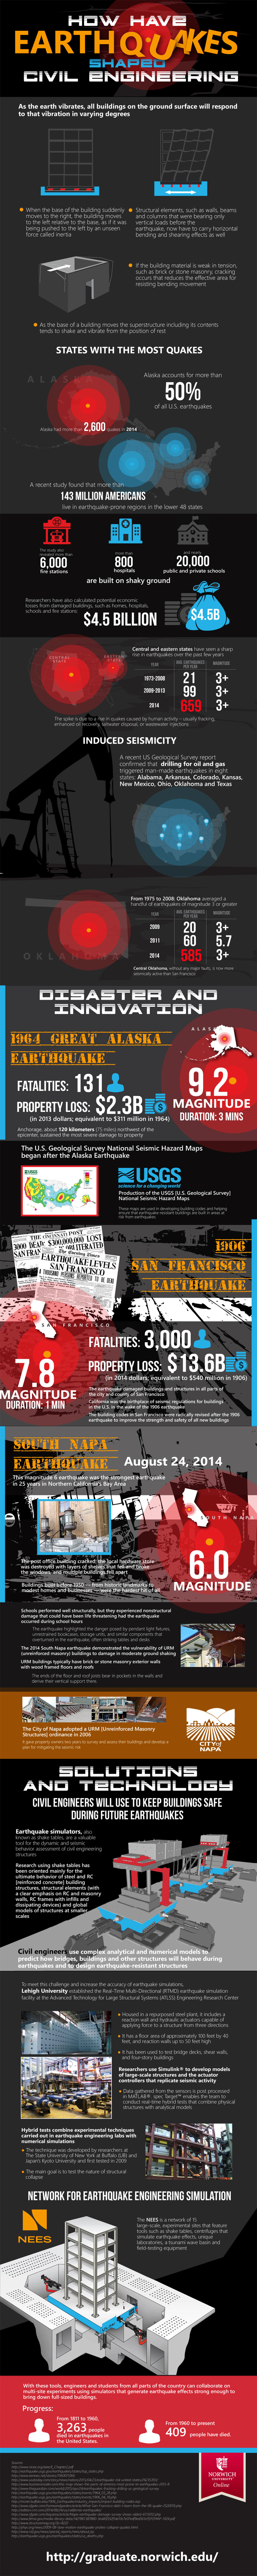 How Civil Engineering Protect Us from Earthquakes Infographic